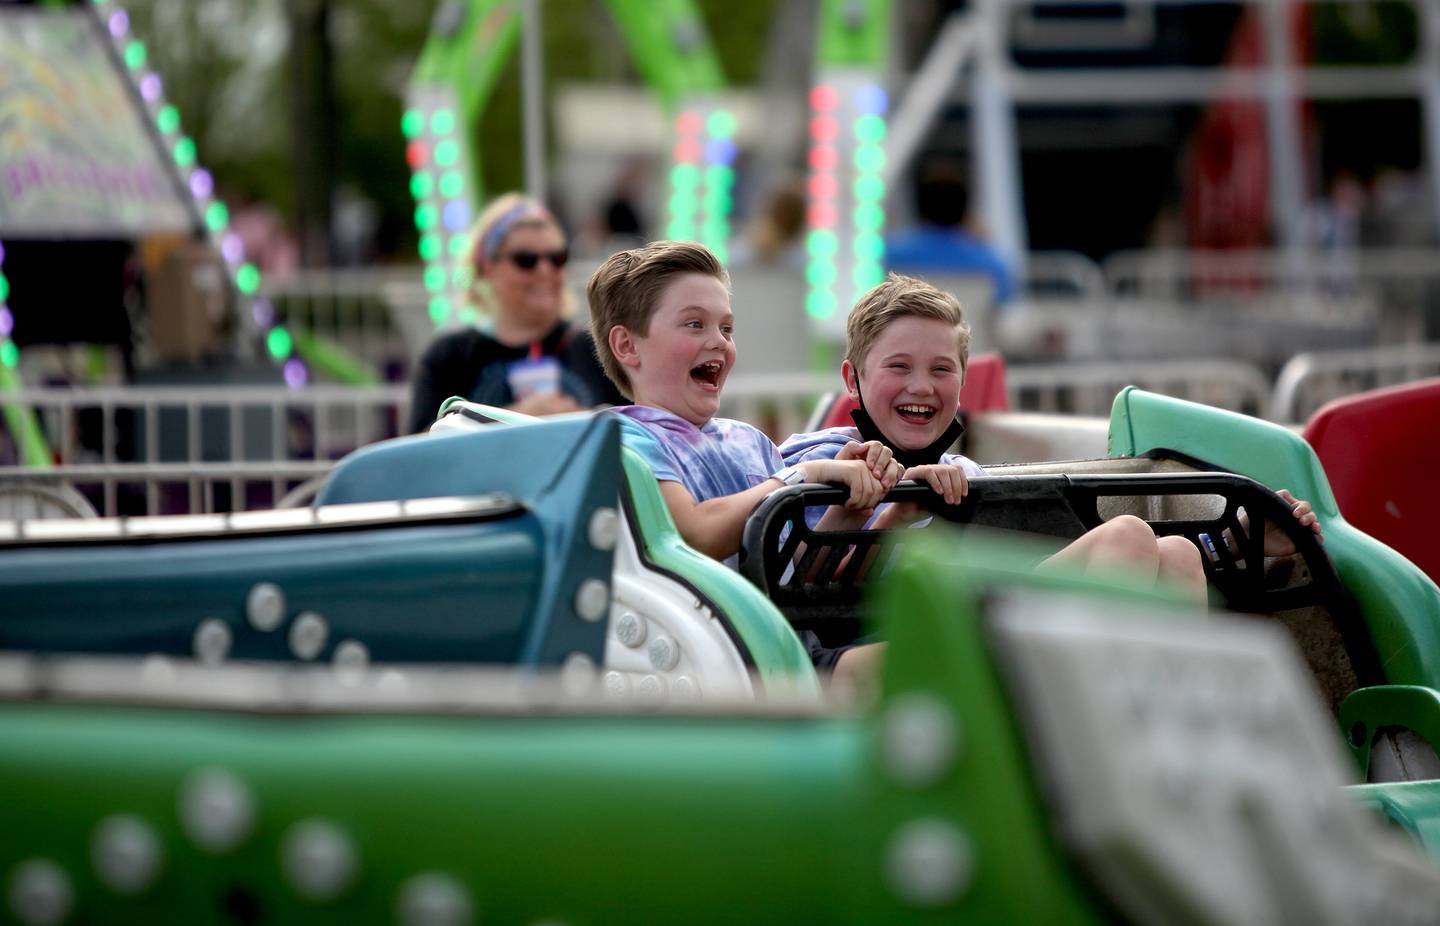 Twins Nick (left) and John Bronec, 10, ride the Sizzler during the 2021 Kane County Fair in St. Charles on Thursday, July 15, 2021.